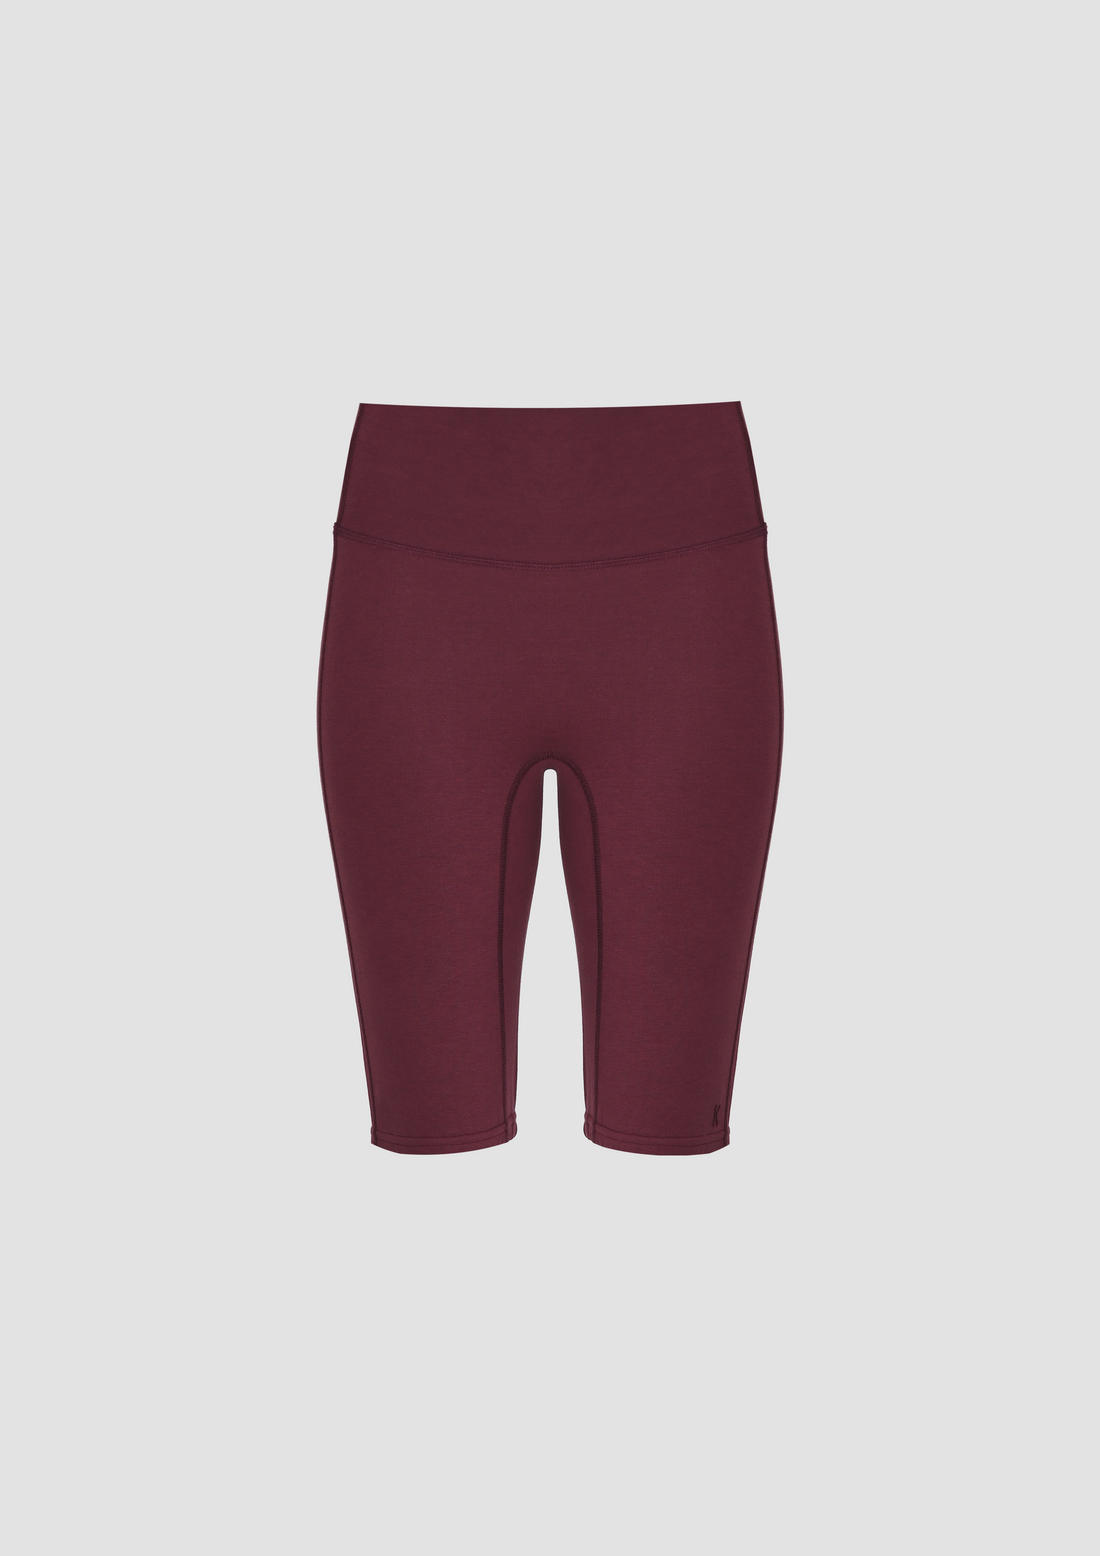 Skylar Cycling Shorts in TENCEL™ Lyocell and Organic Cotton in Burgundy